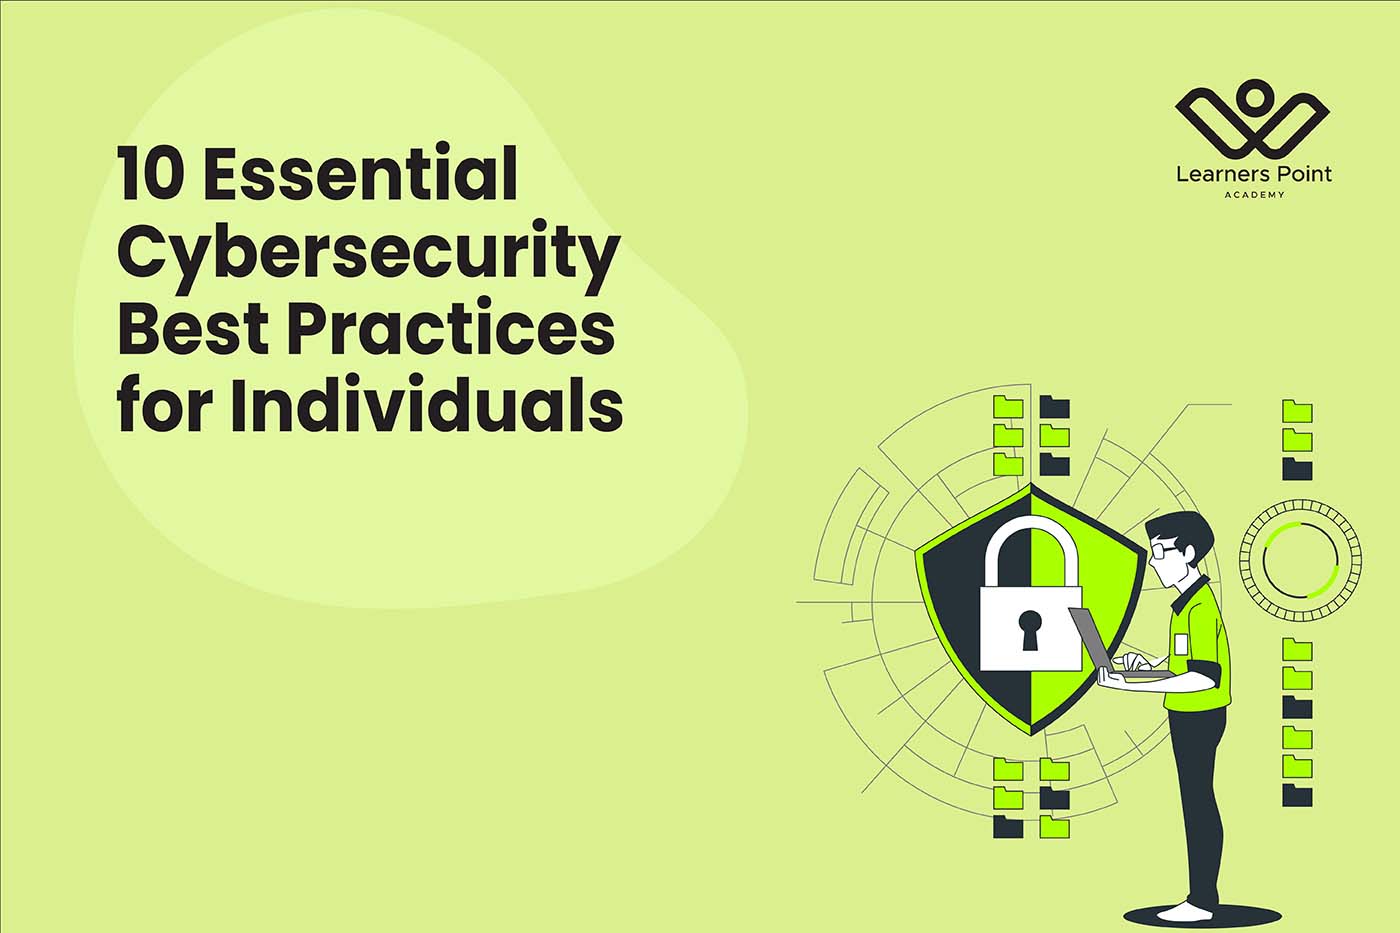 10 Essential Cybersecurity Best Practices for Individuals